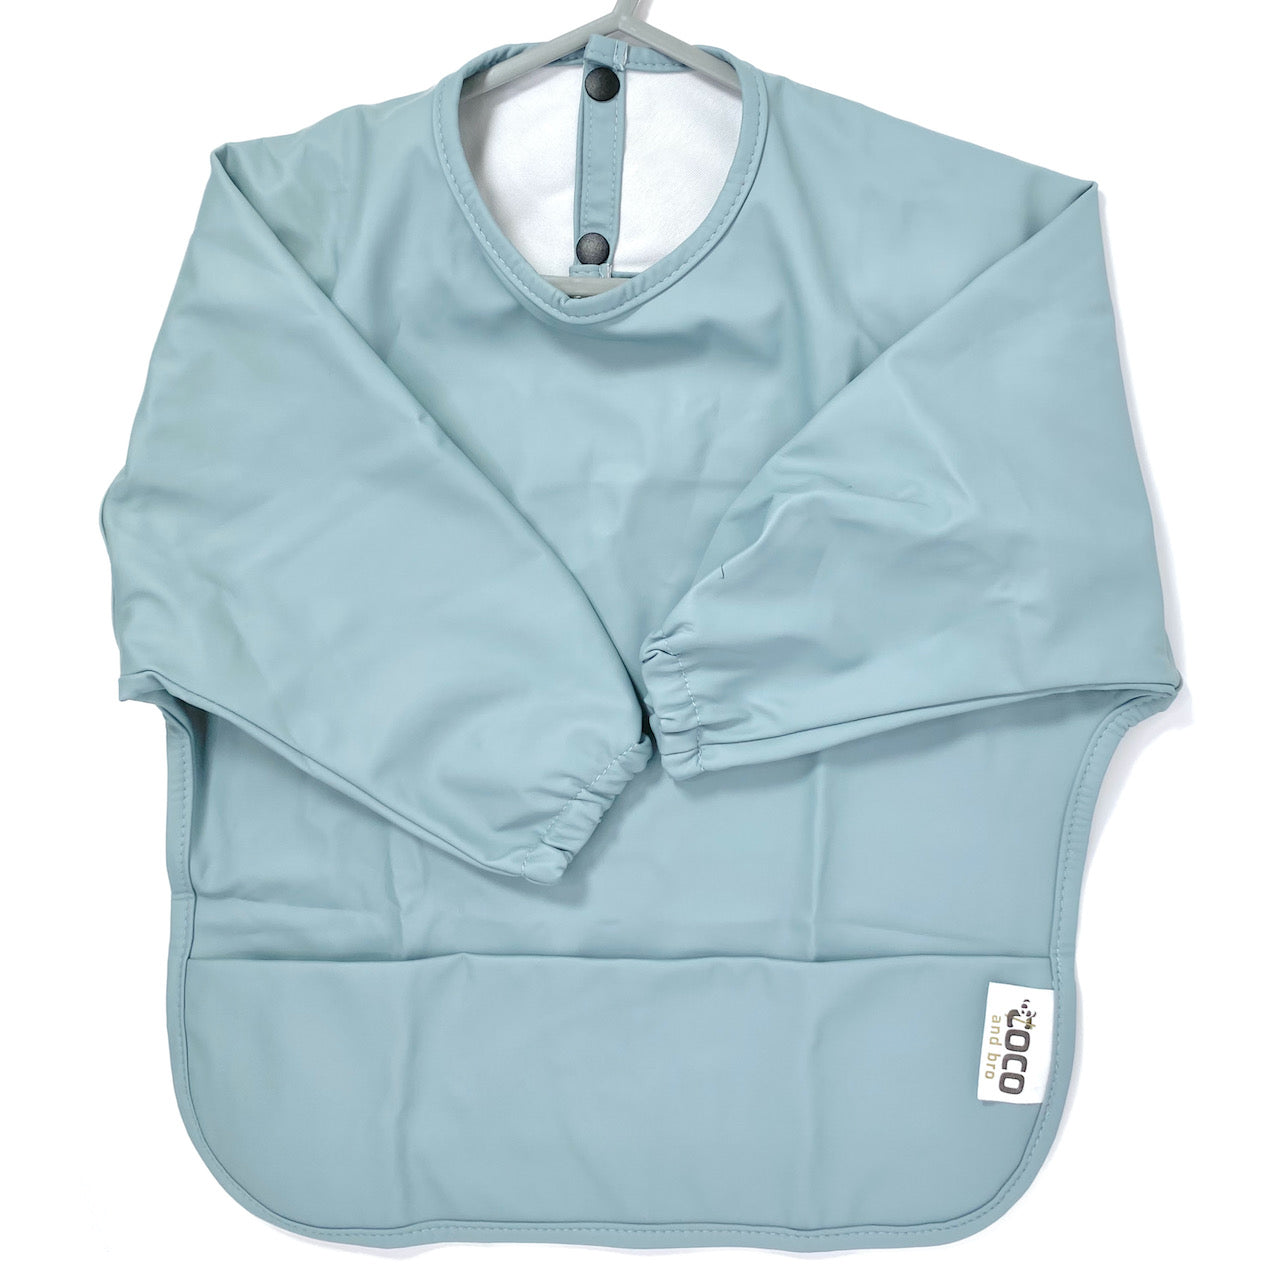 Long-sleeve kids apron in an ice blue colour, showing front view.